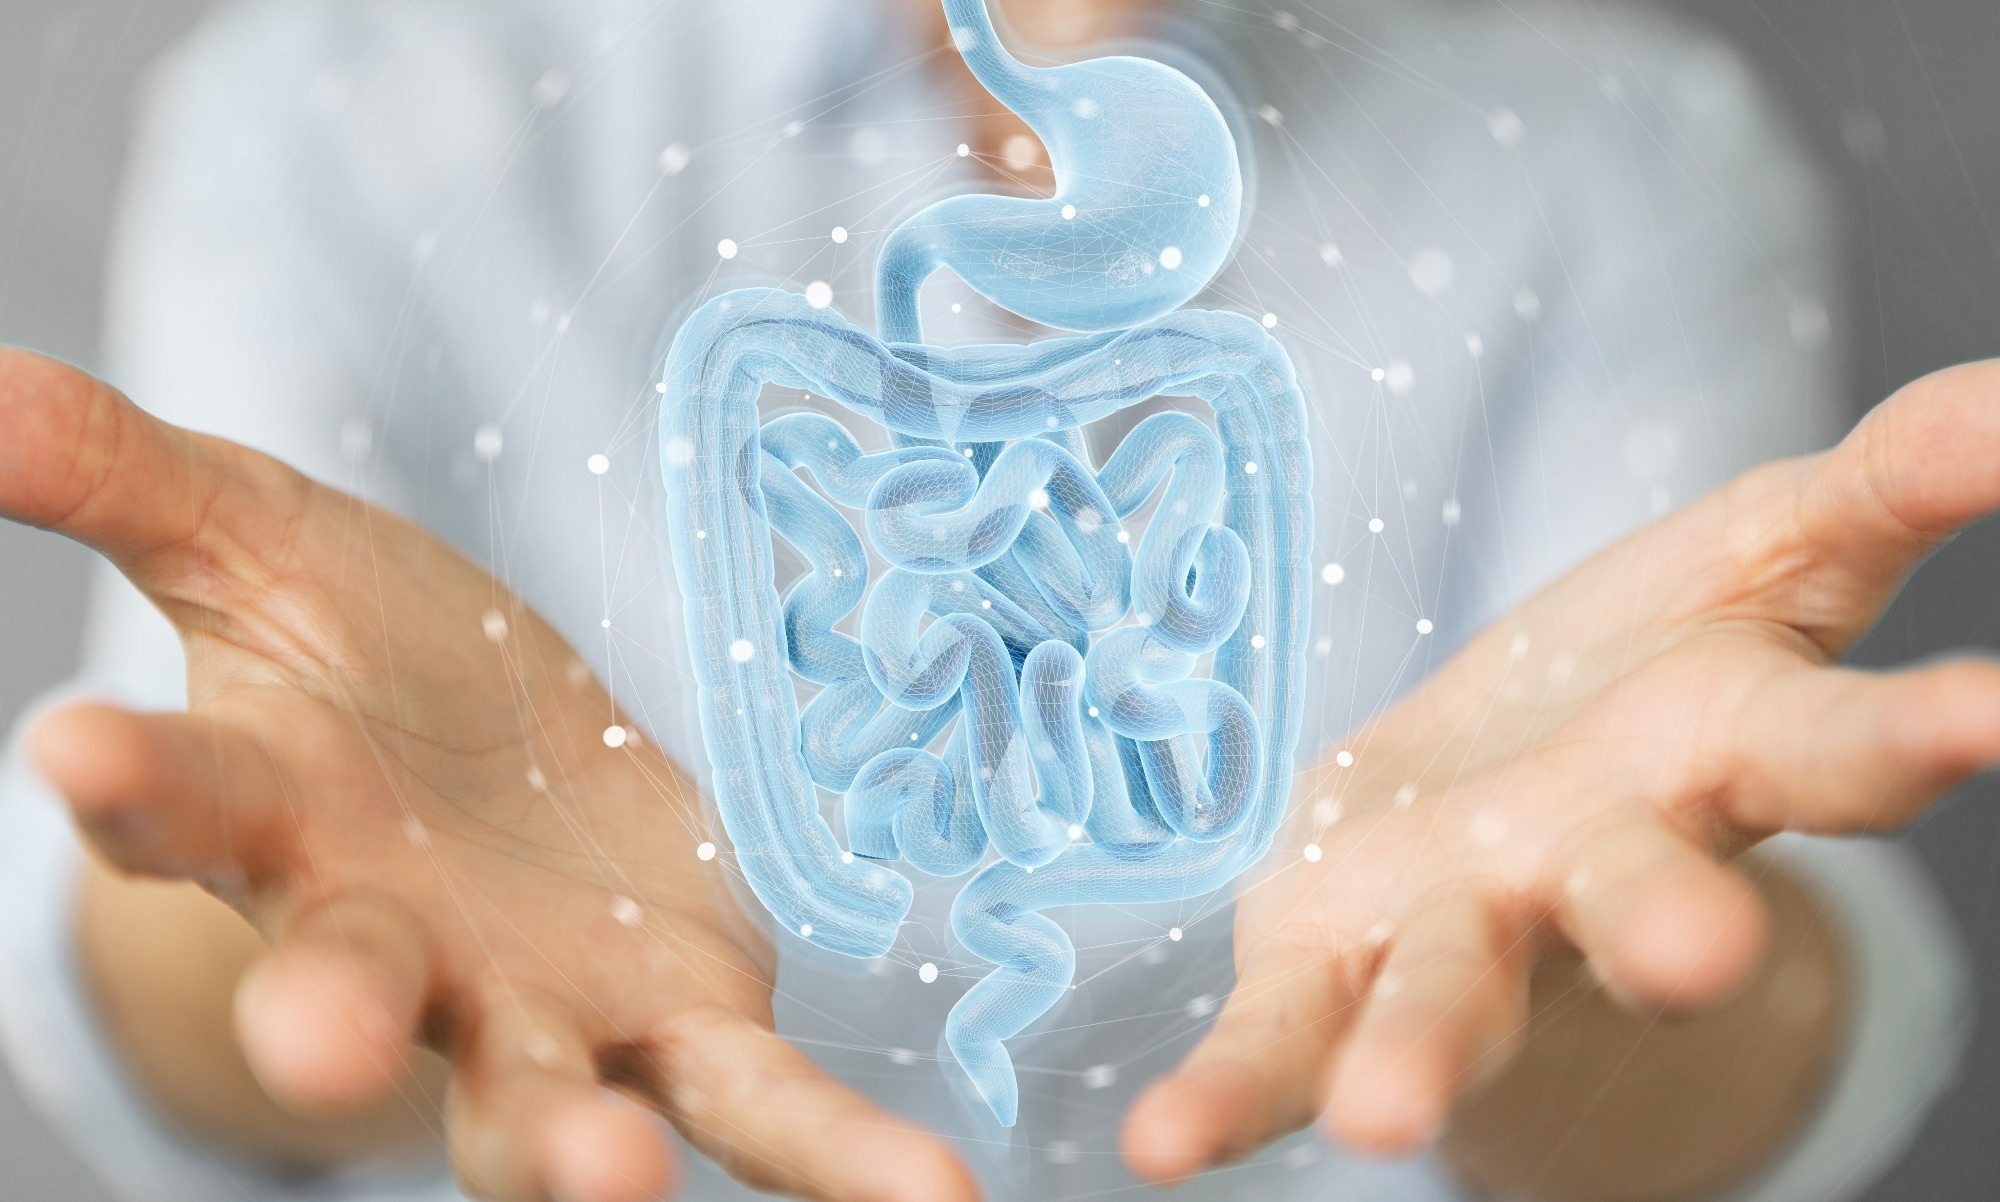 Study: The enteric nervous system relays psychological stress to intestinal inflammation. Image Credit: sdecoret/Shutterstock.com